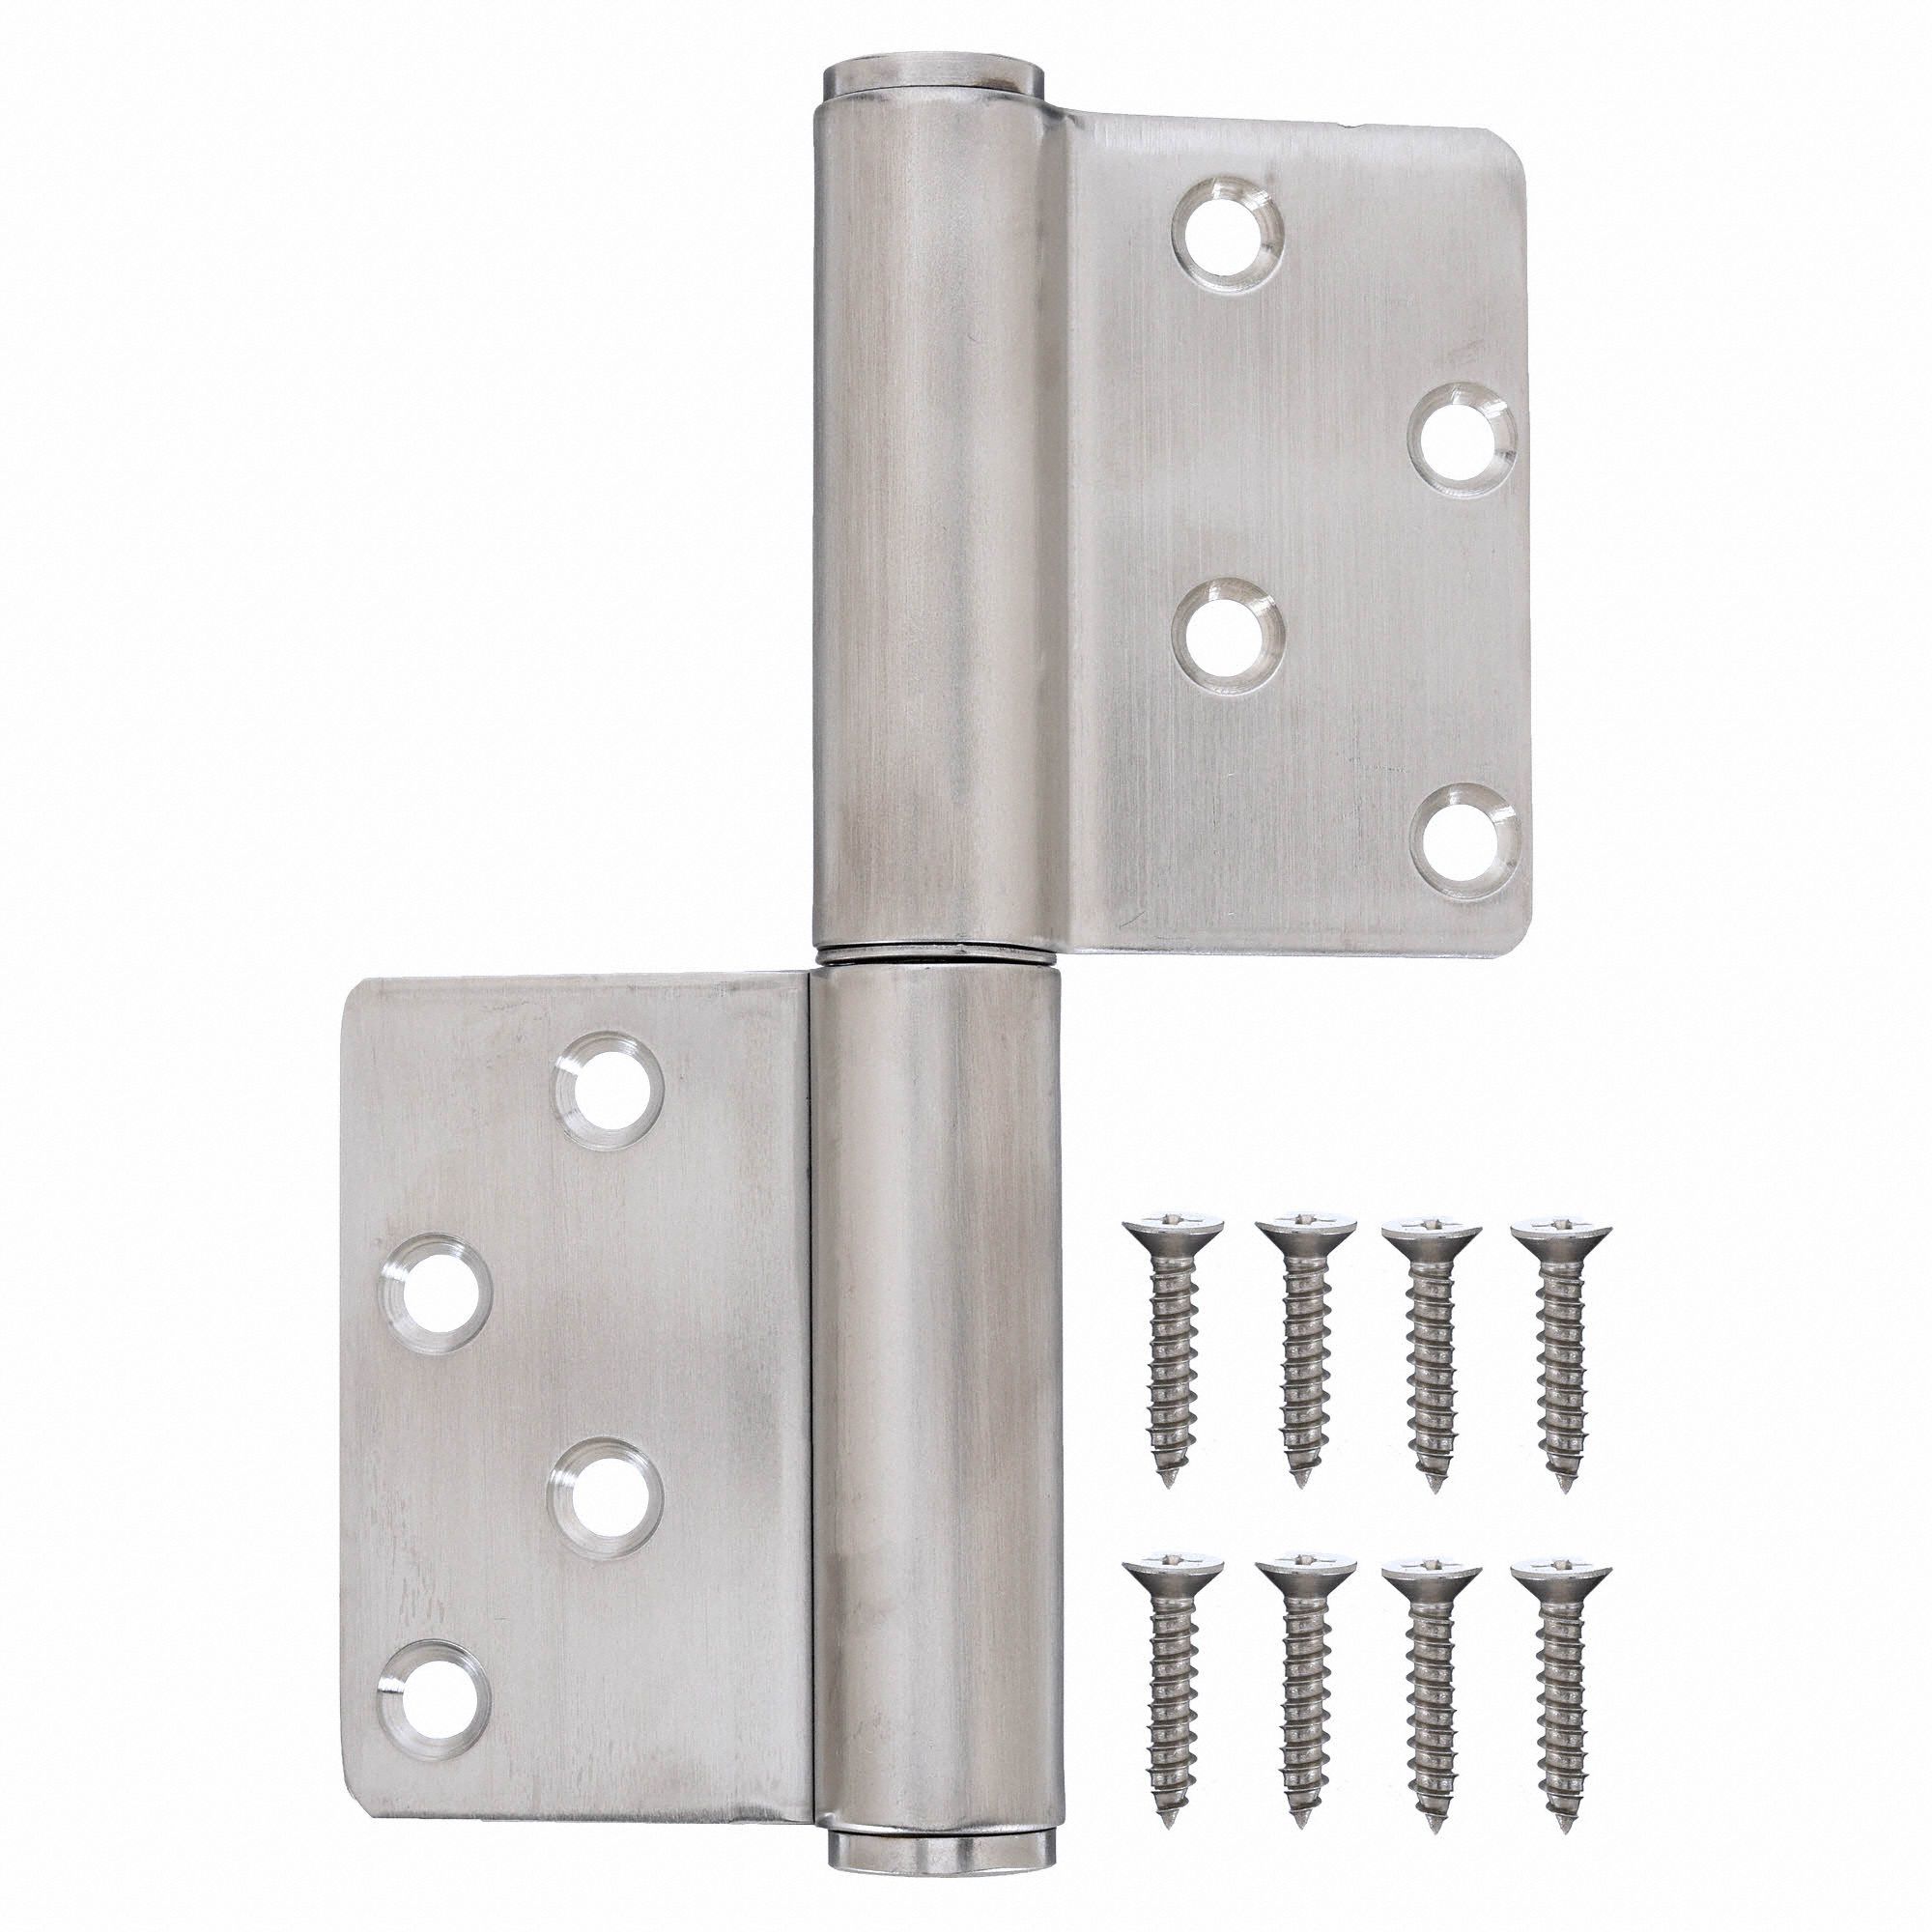 handed Stainless steel Lift off hinge 90 x 38 mm / 1pcs 